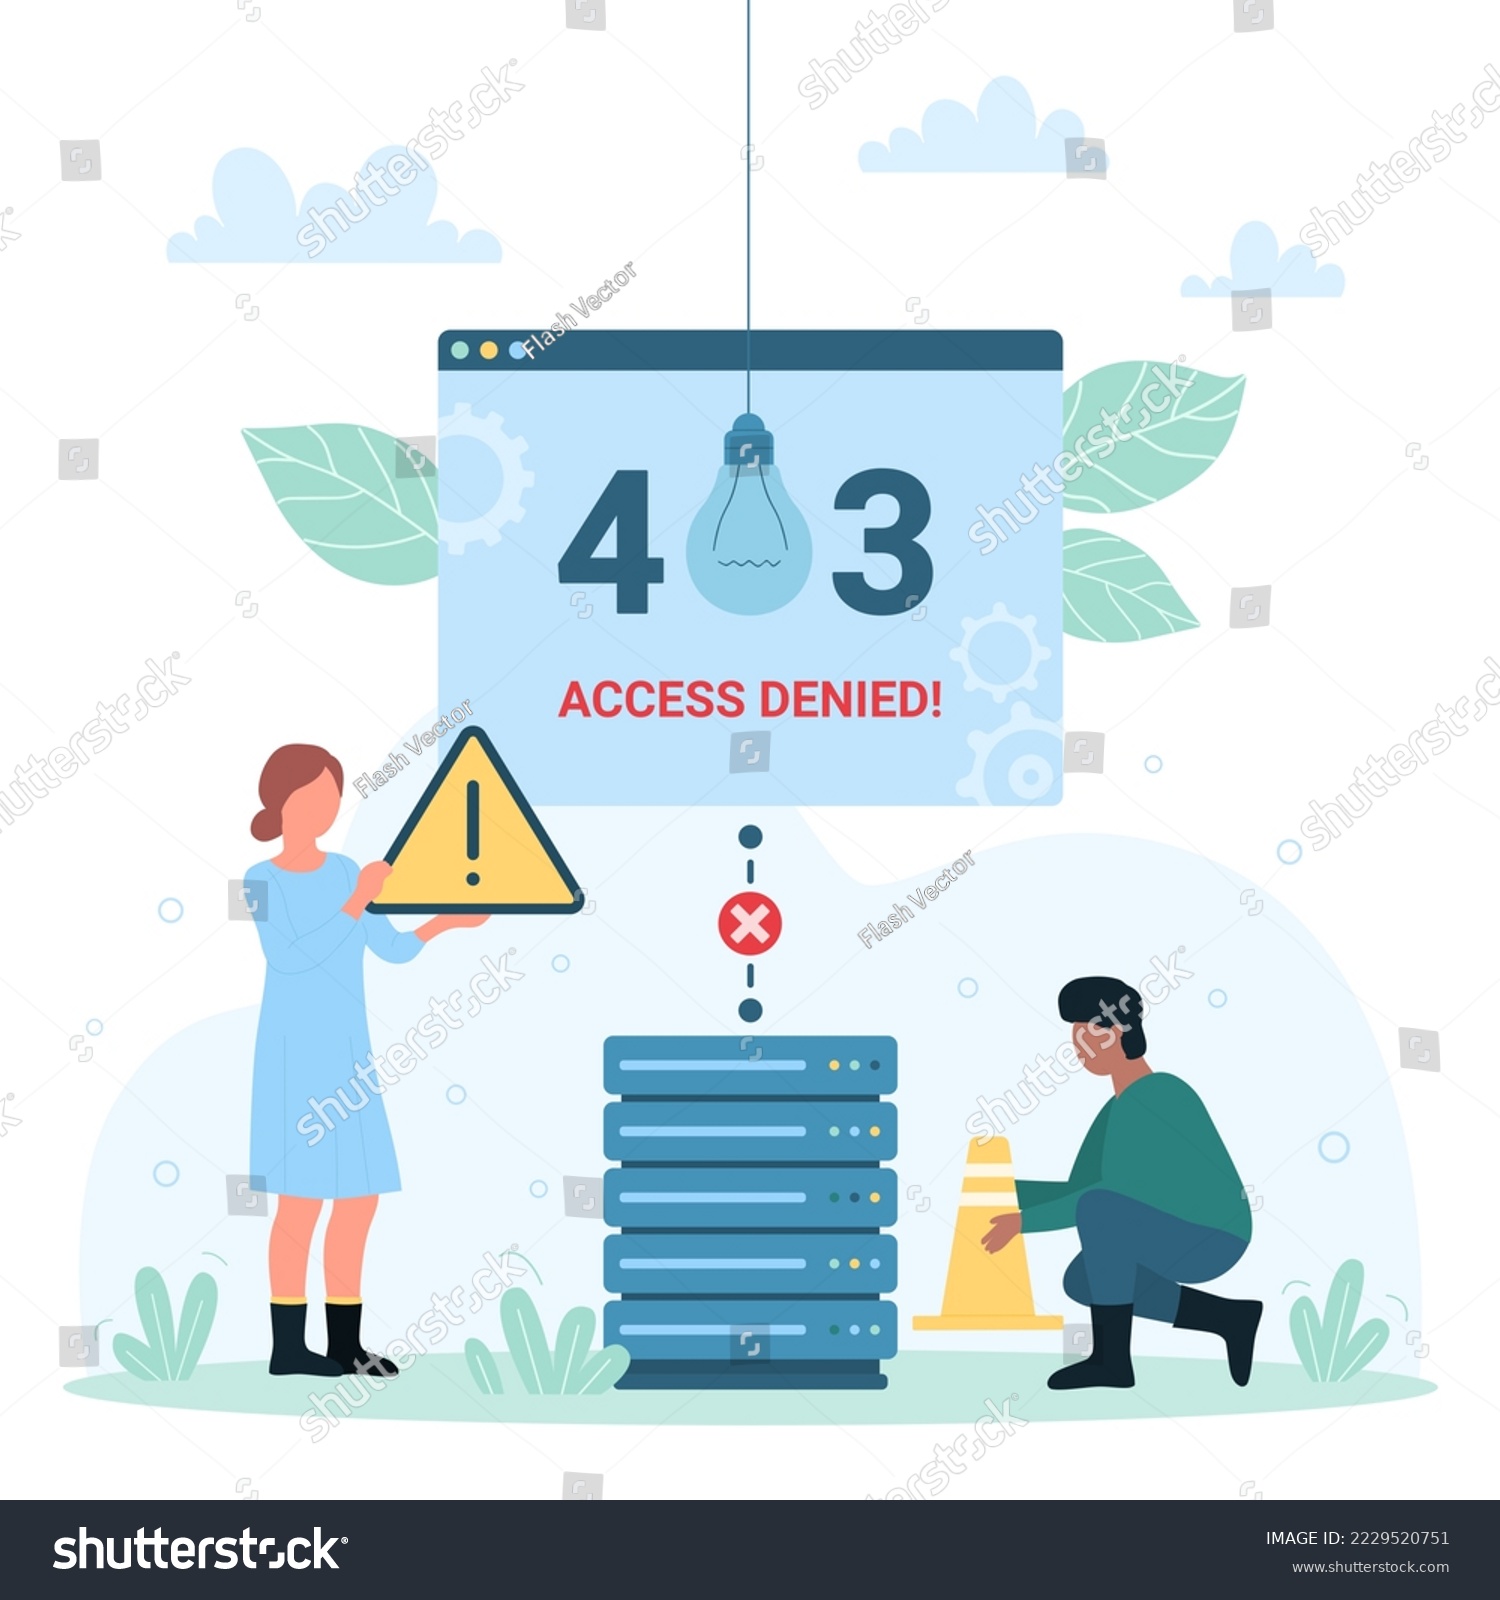 SVG of 403 error, access denied vector illustration. Cartoon tiny people holding warning problem message and traffic cone of construction site, connection disconnect and network denial to load web page svg